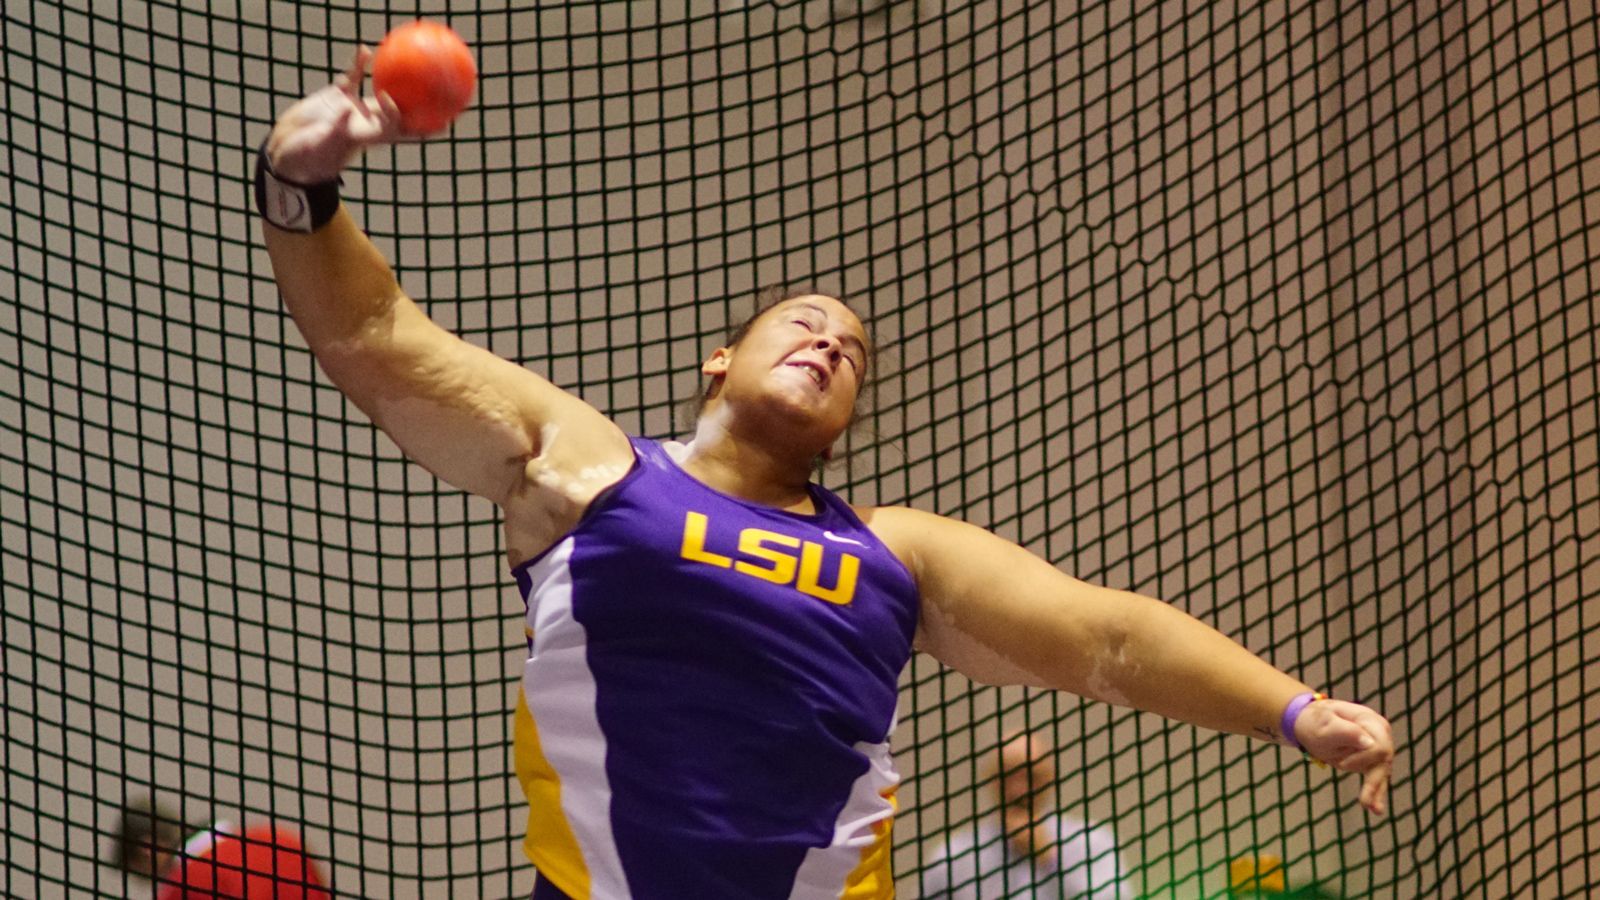 Bliss Sets Indoor Lsu Record In Shot Put